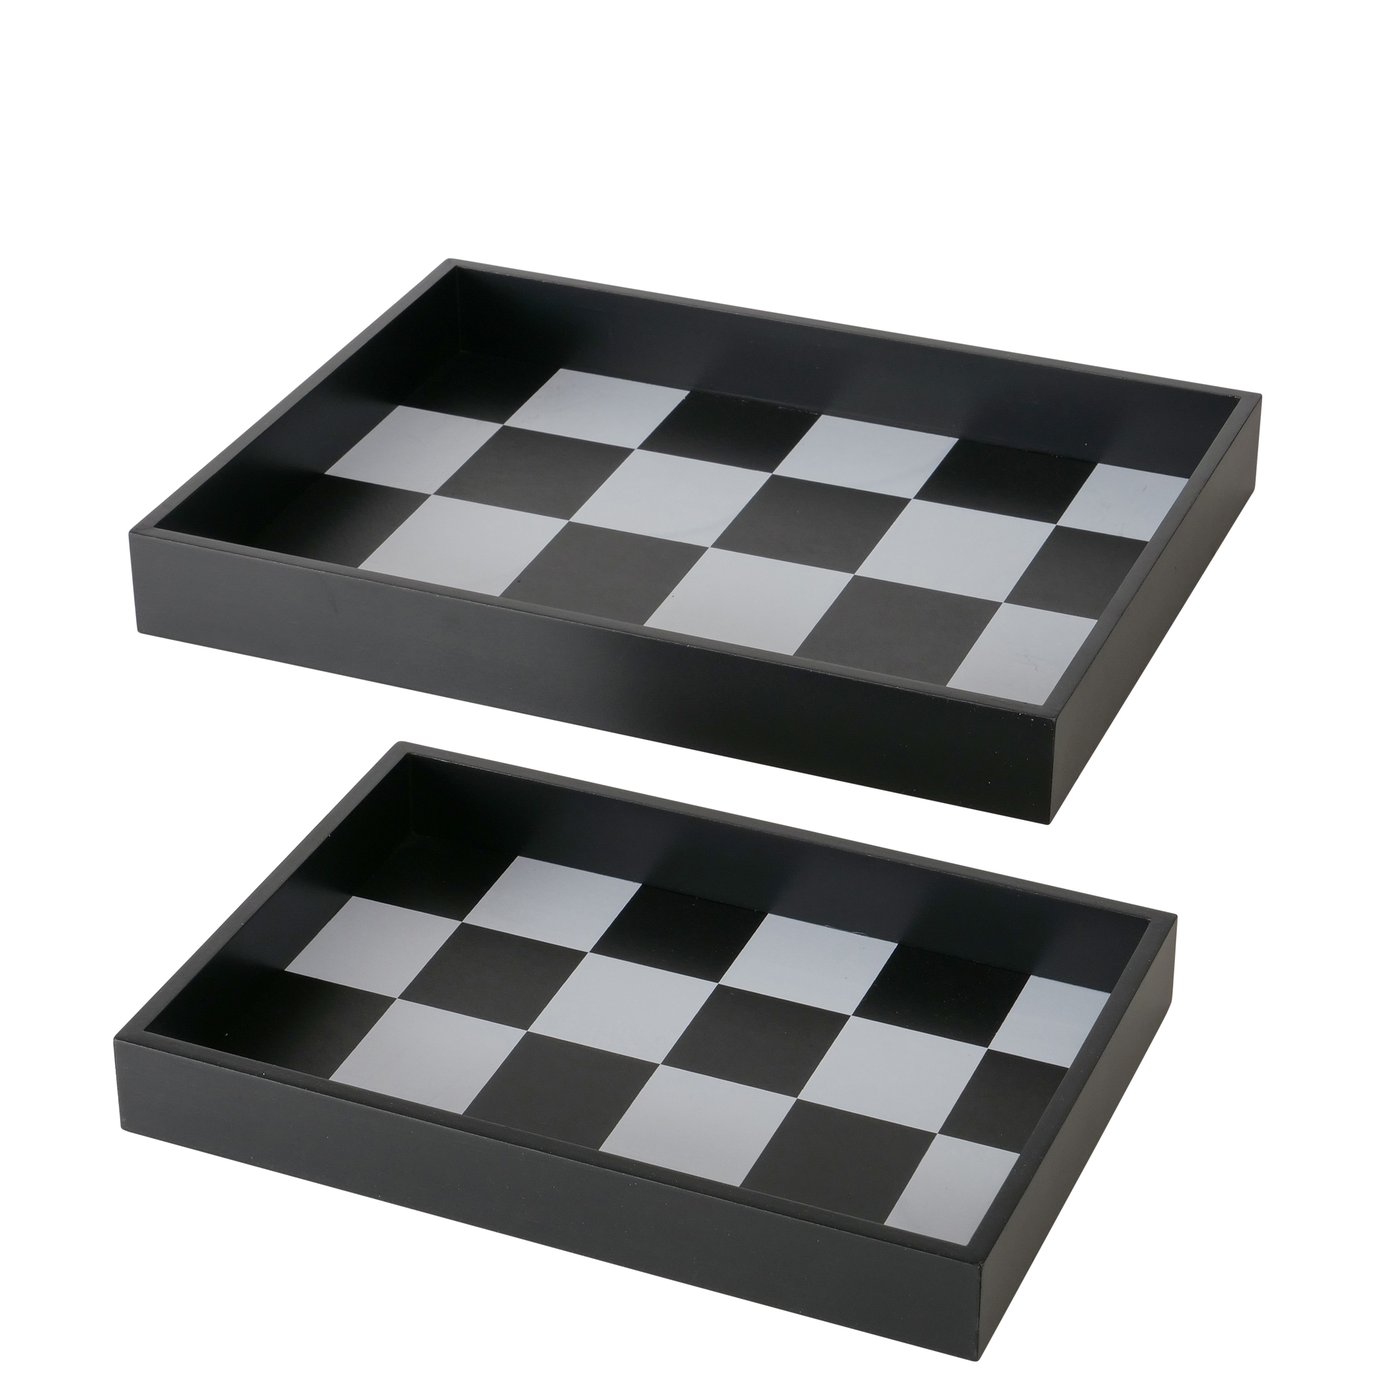 &Quirky Gerd Mono Design Set of 2 Serving Trays